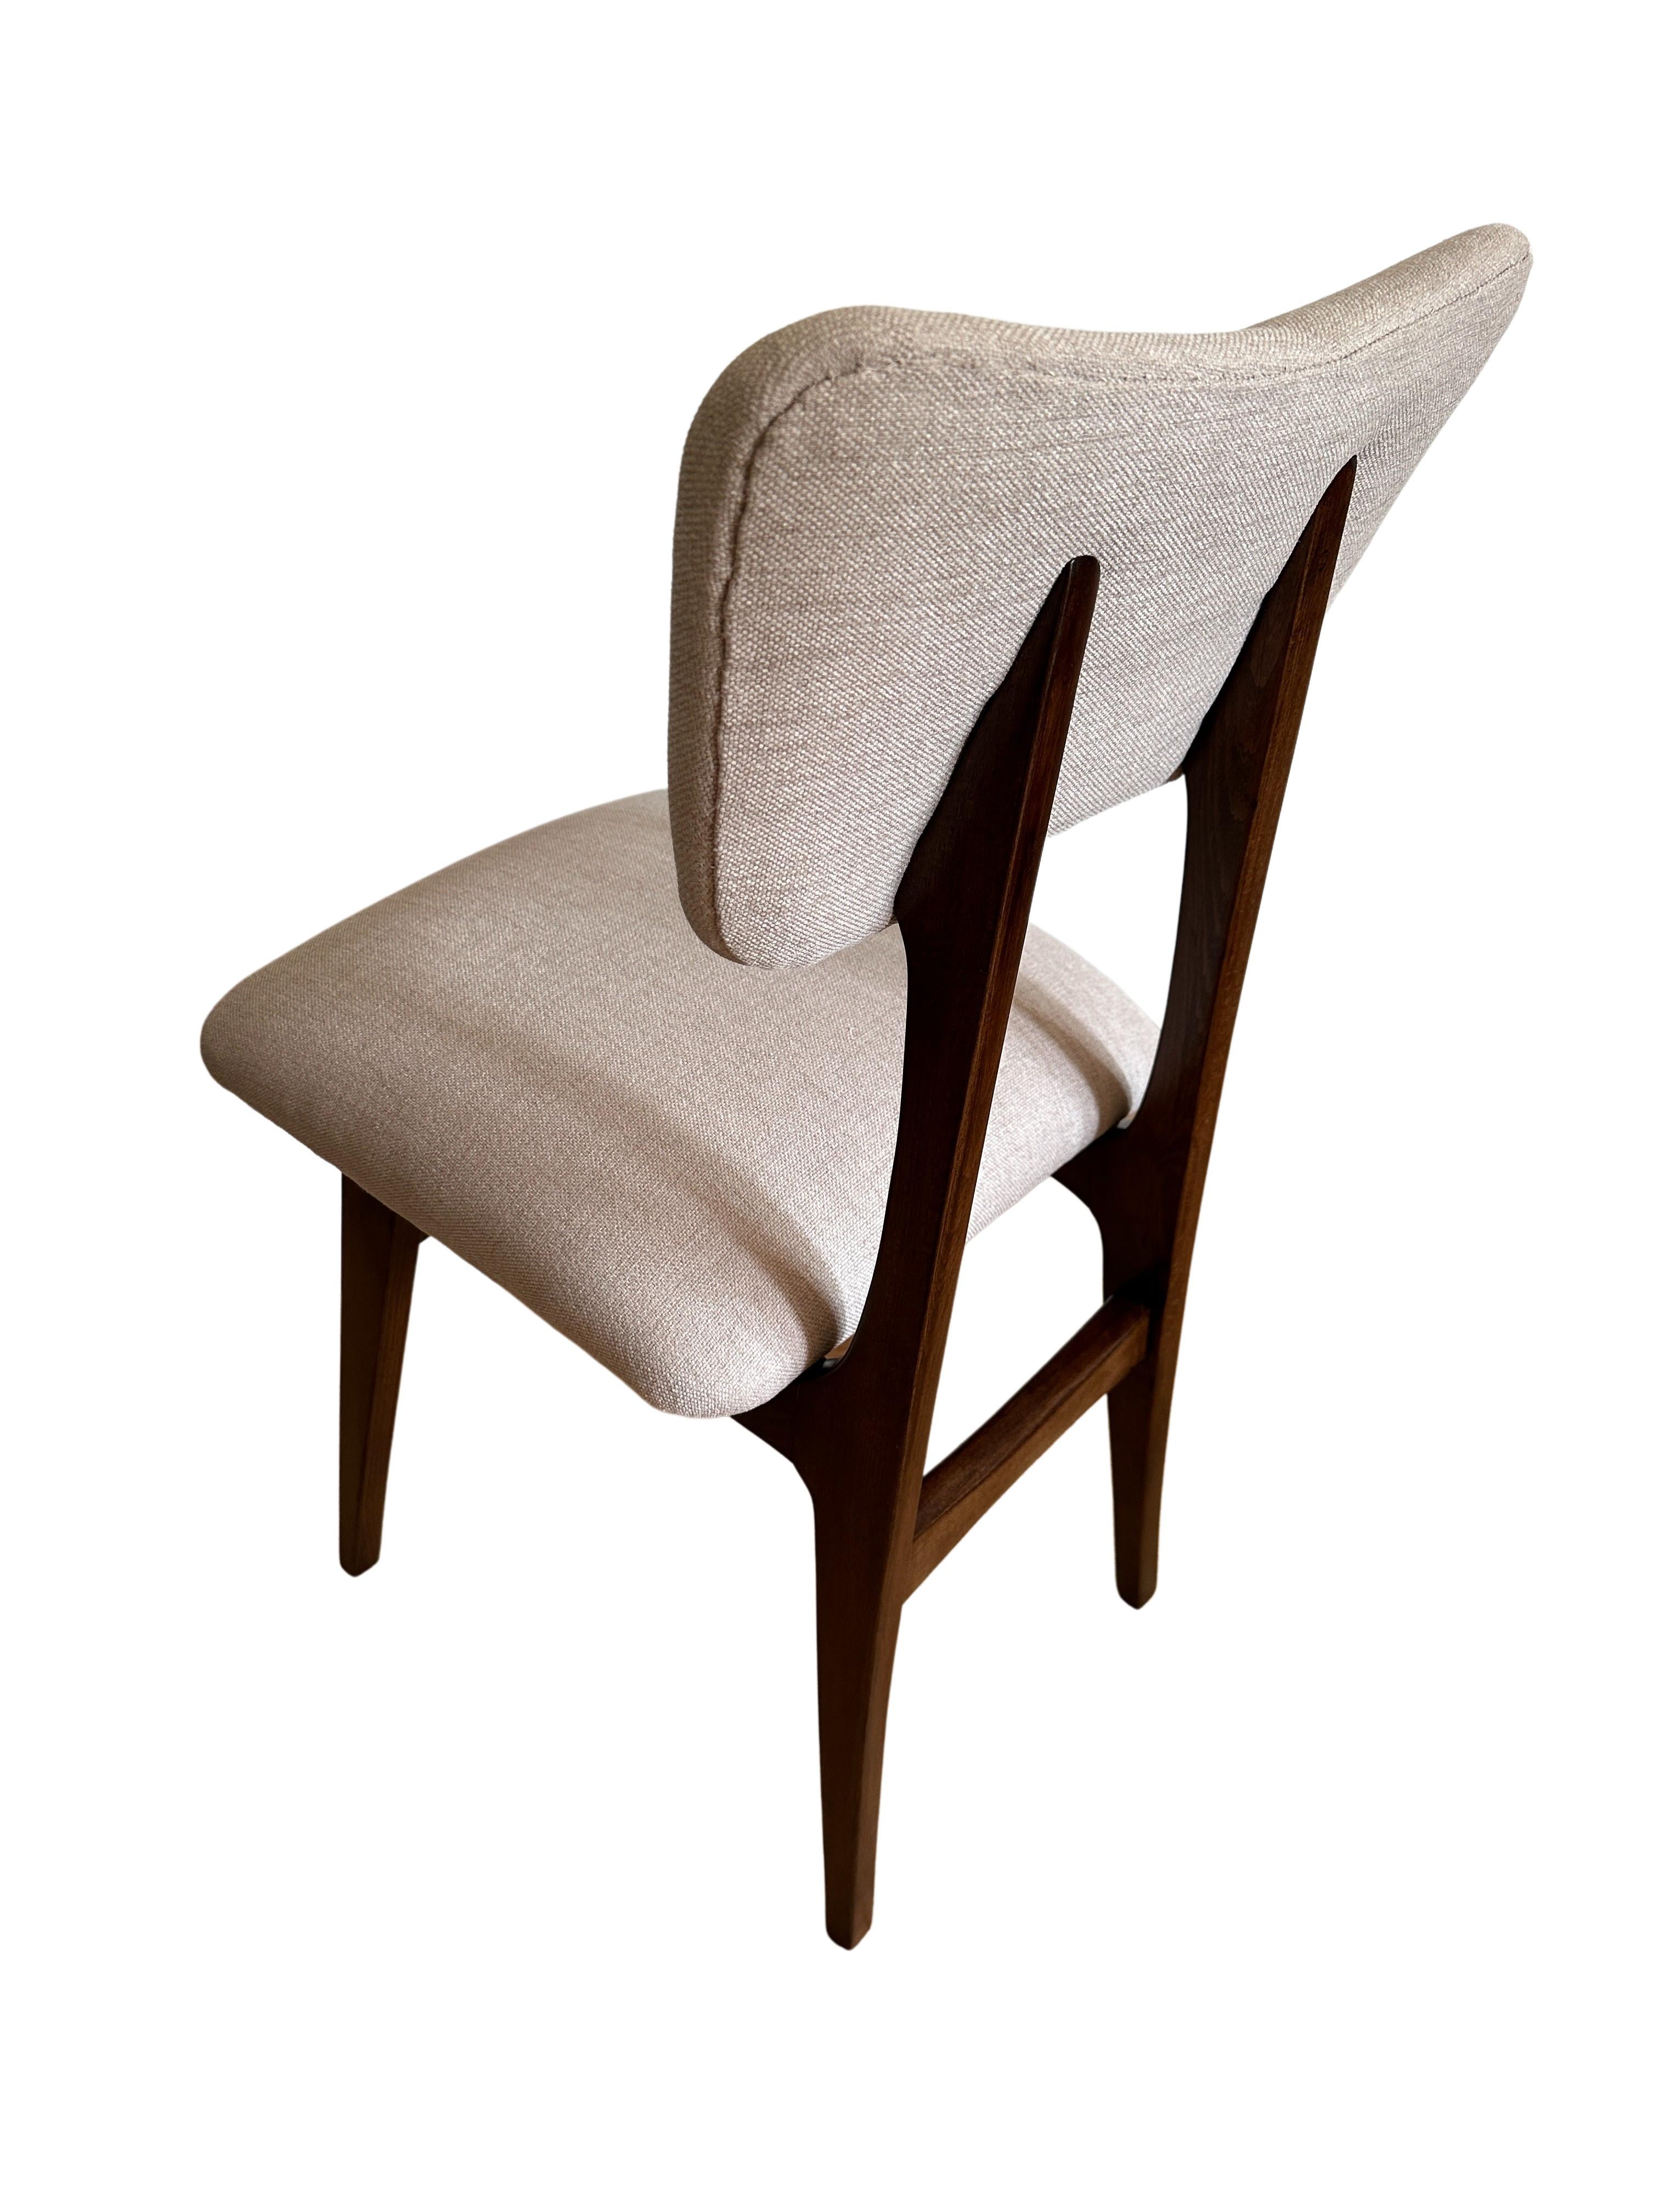 20th Century Set of Four Midcentury Beige Dining Chairs, Europe, 1960s For Sale